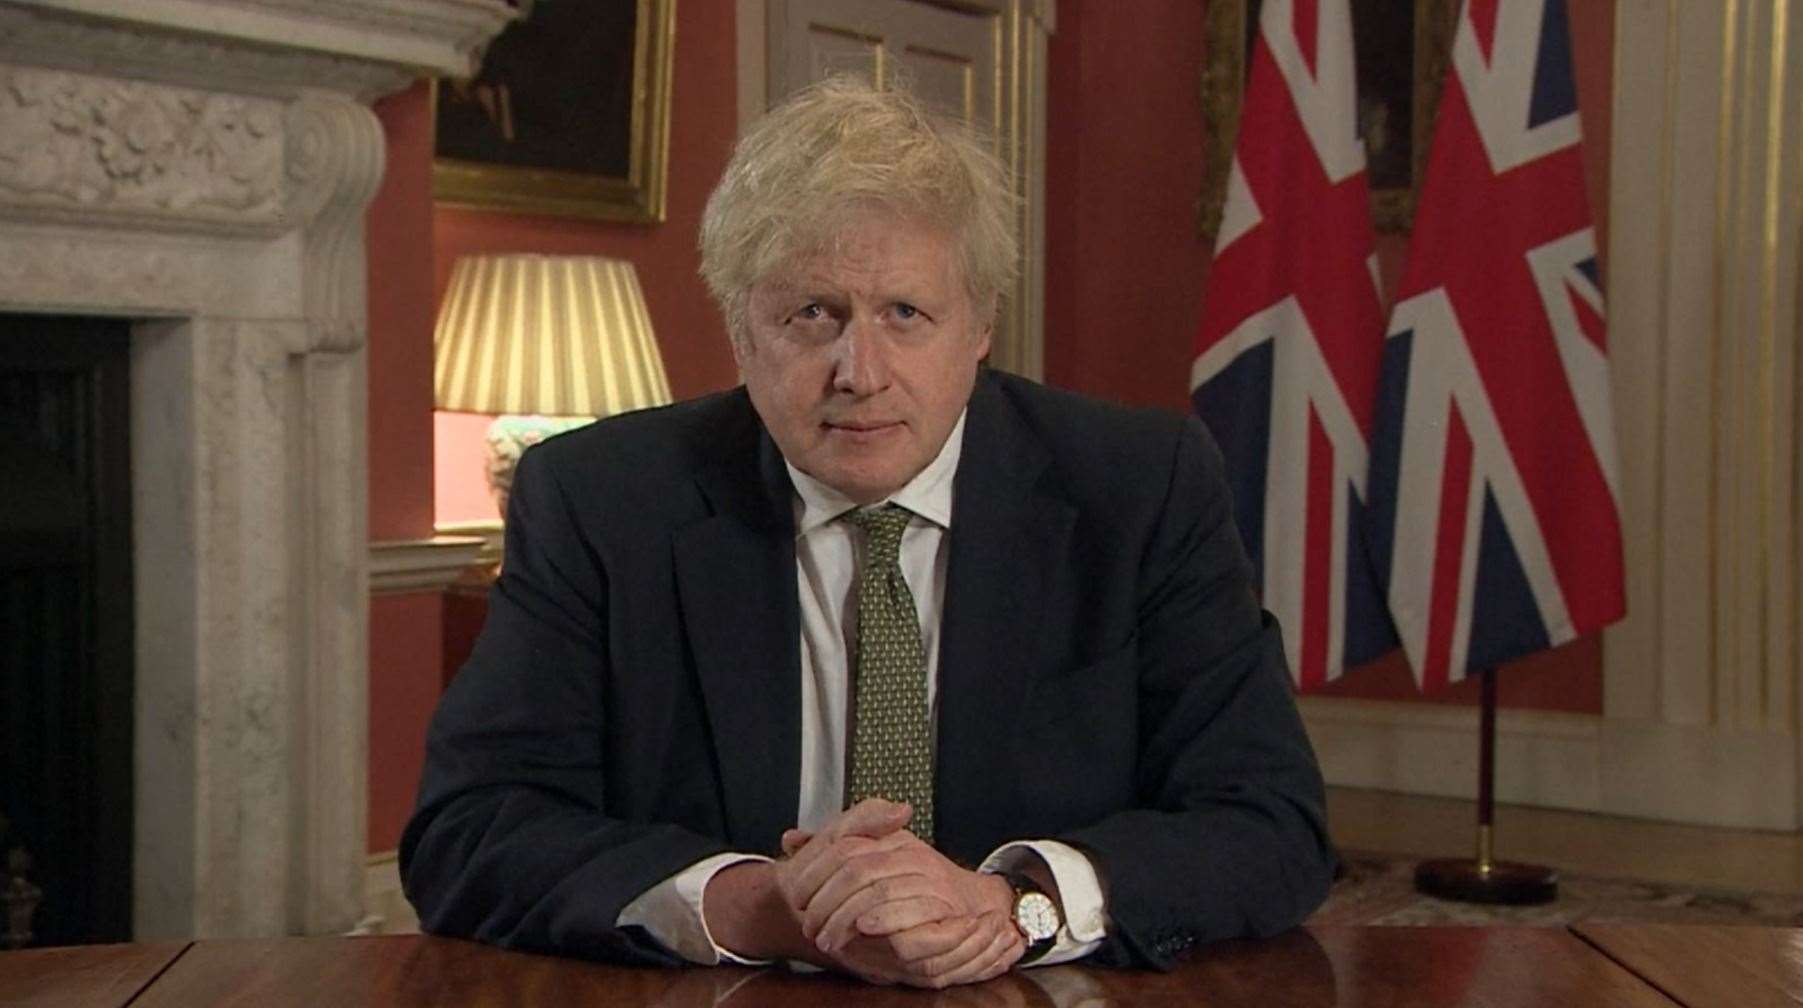 Prime Minister Boris Johnson making a televised address to the nation from 10 Downing Street setting out new emergency measures to control the spread of coronavirus in England